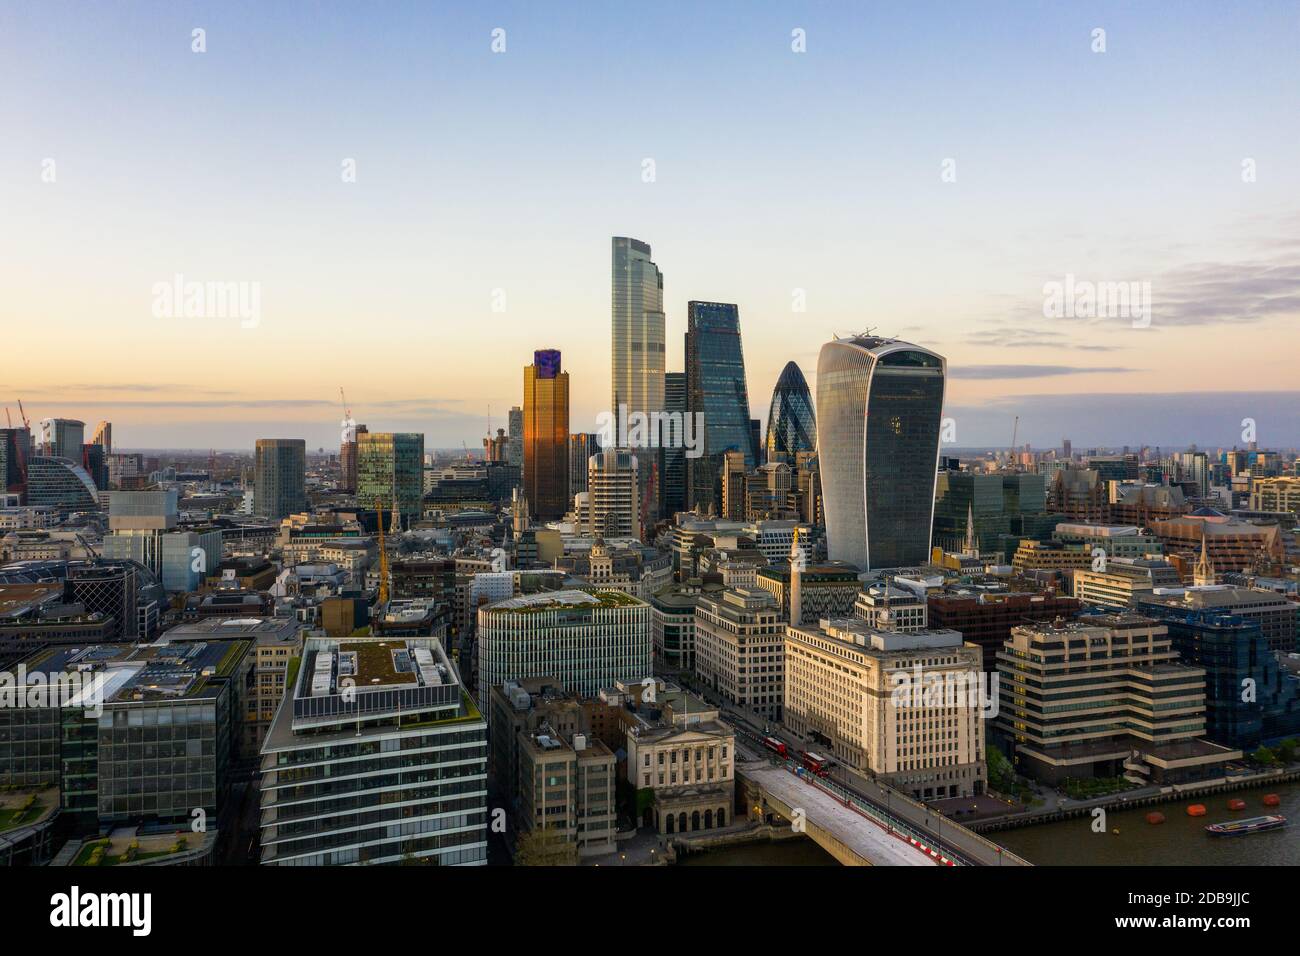 London city skyline drone view of square mile at sunrise Stock Photo